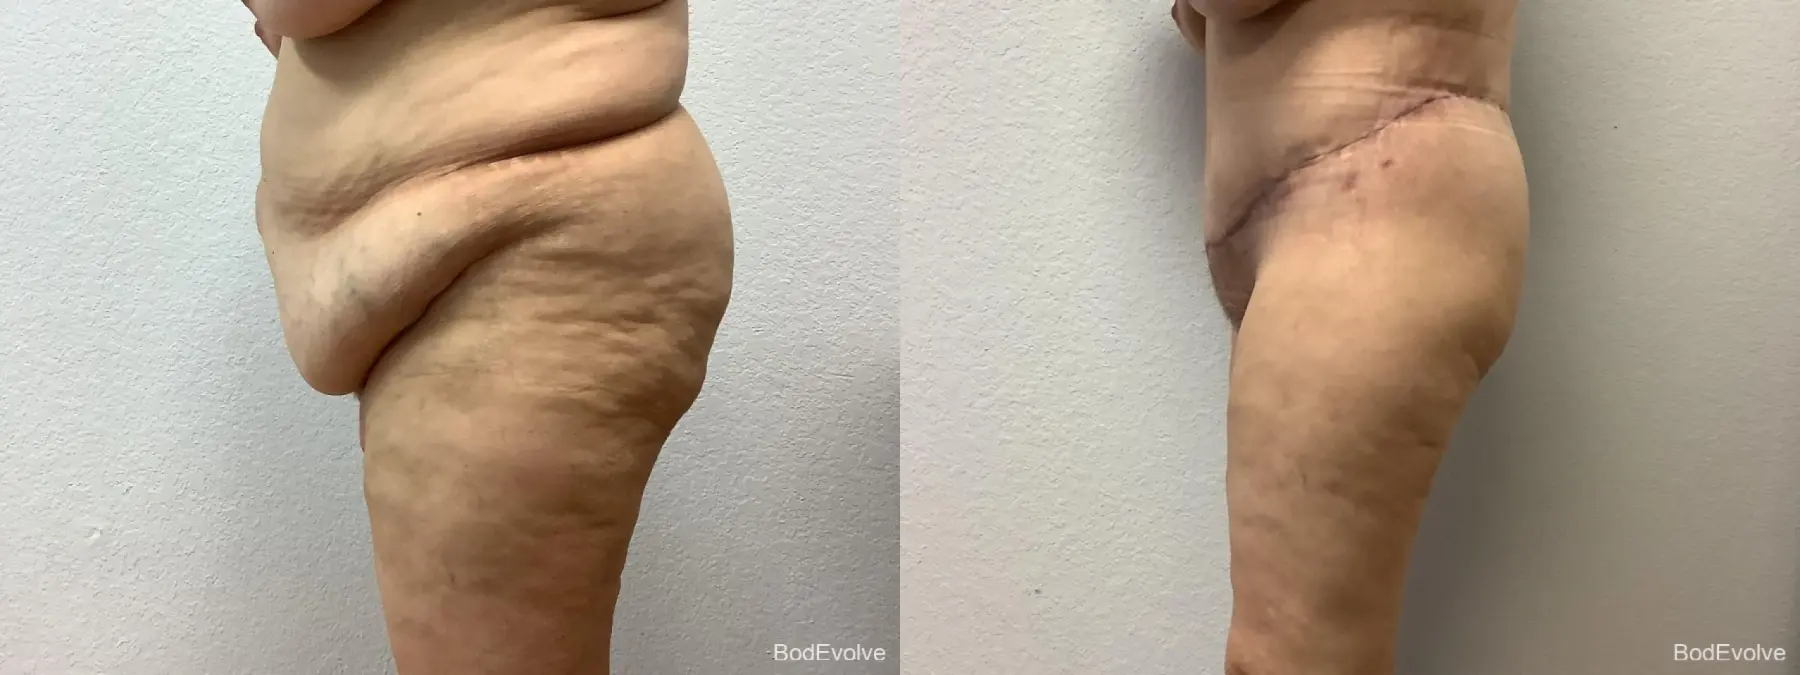 After Massive Weight Loss: Patient 1 - Before and After 3